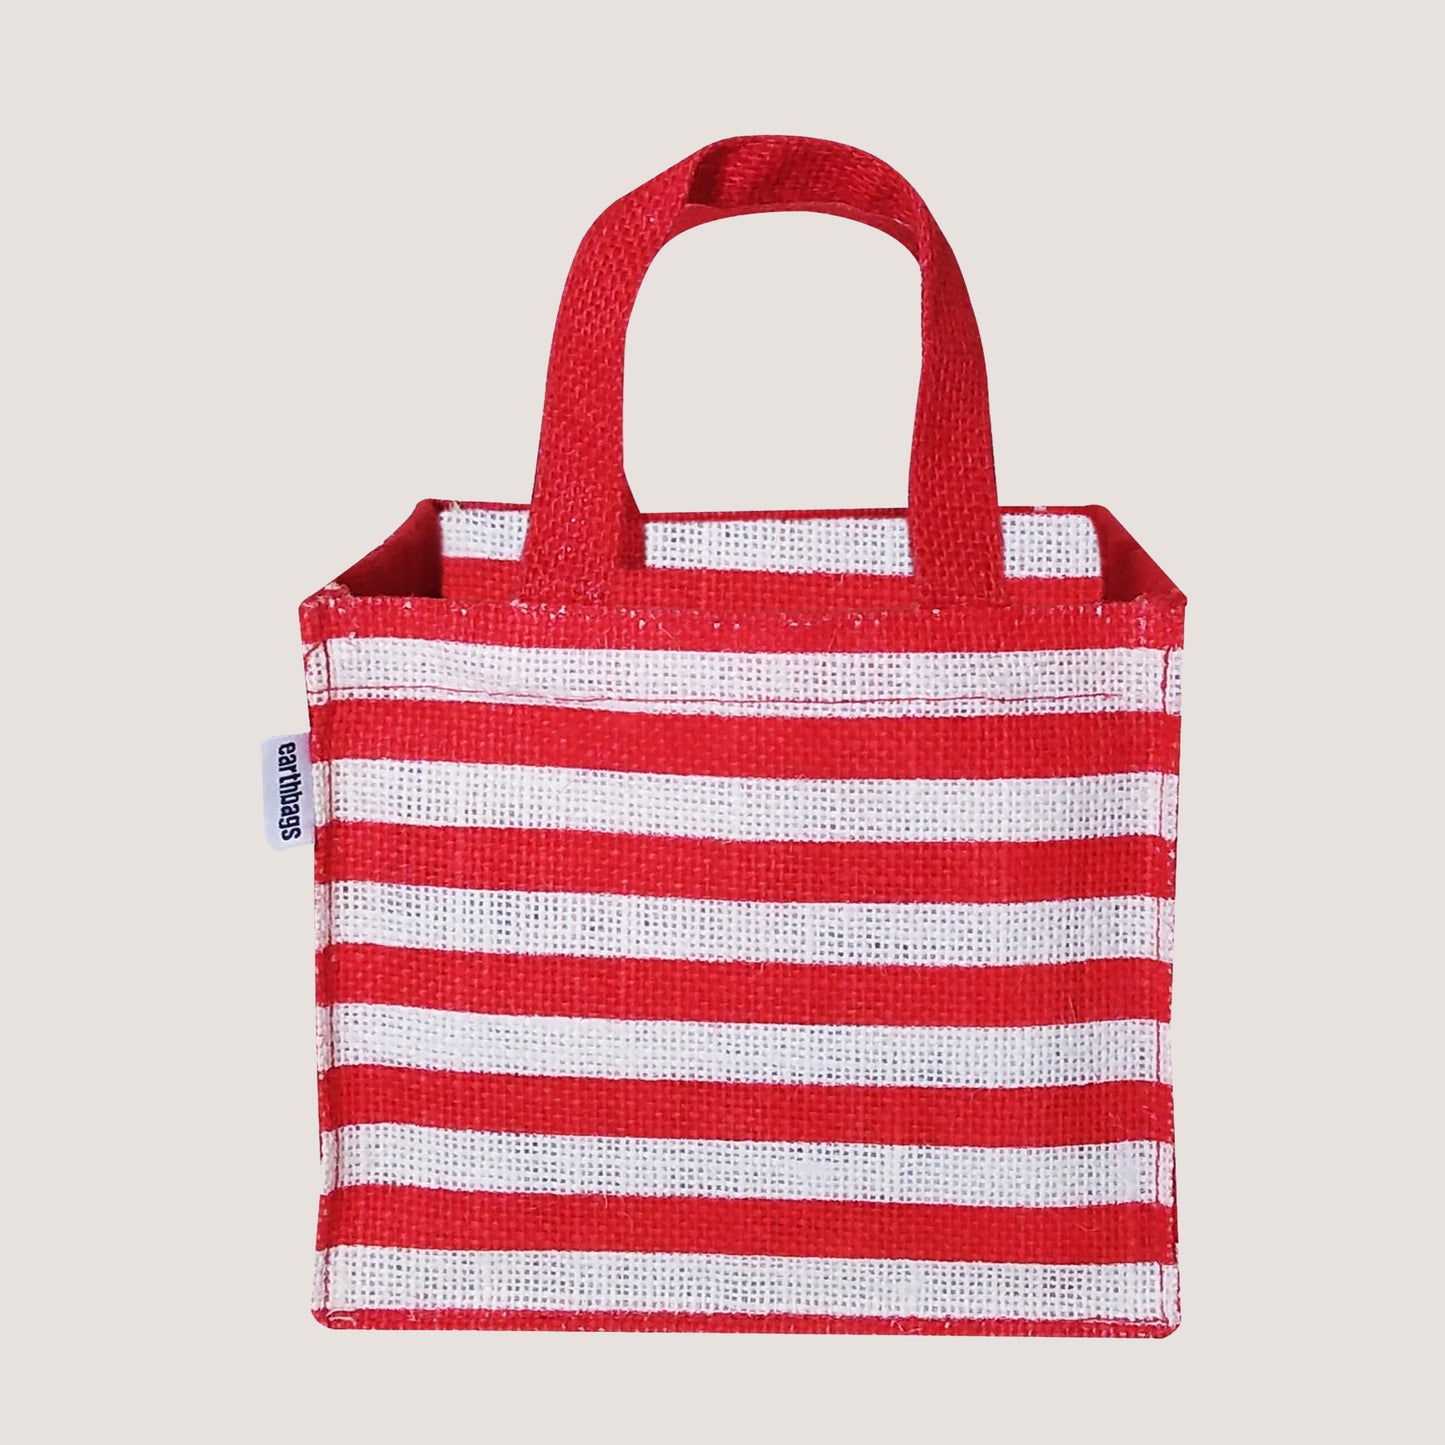 EARTHBAGS STRIPED CUTE JUTES GIFT BAGS - PACK OF 5